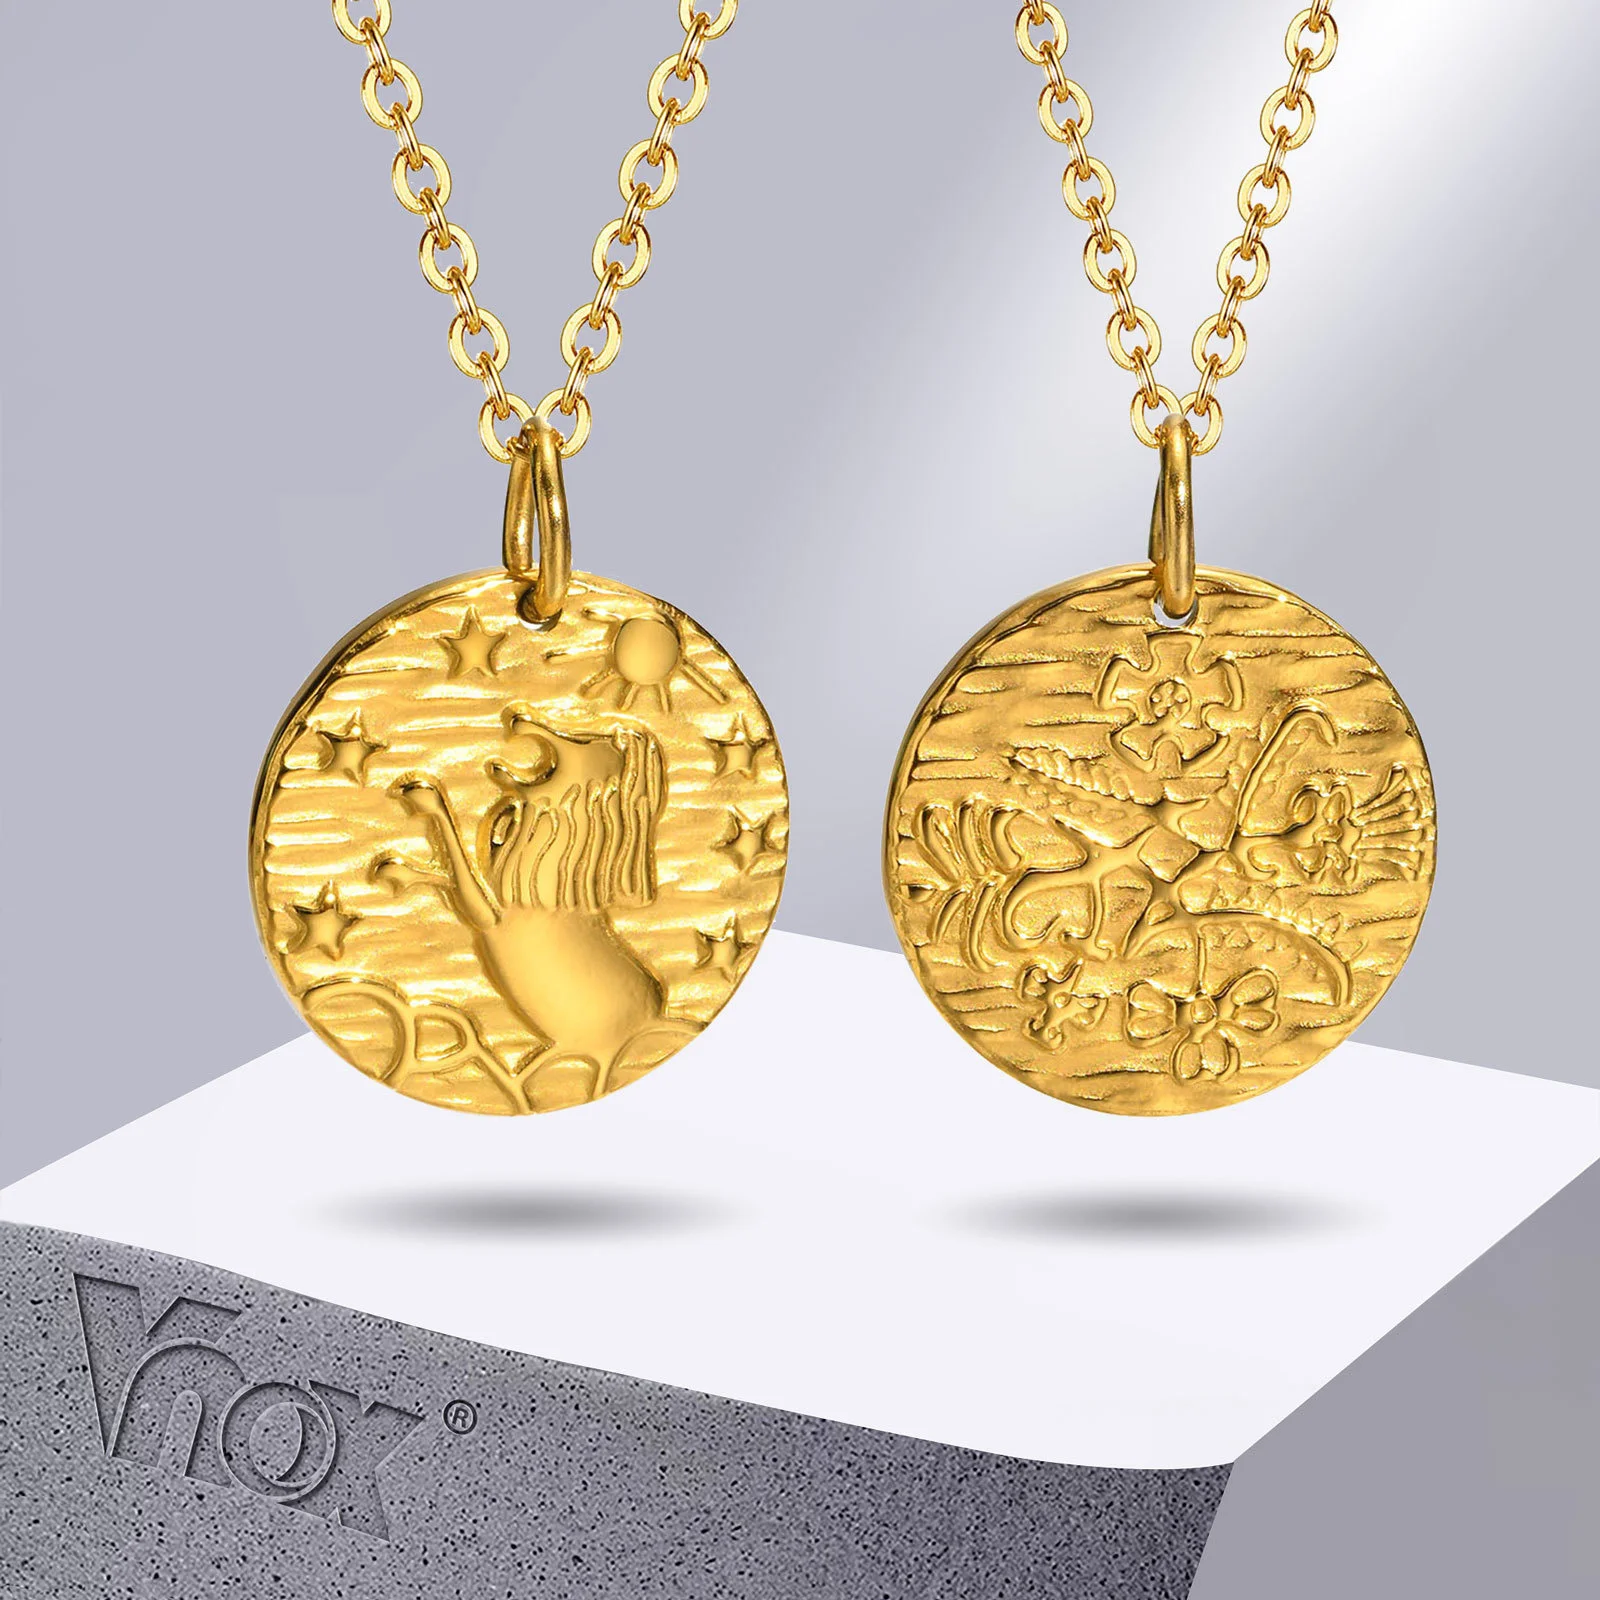 

Vnox New Trendy Hammered Round Necklaces for Women Gift, Gold Color Stainless Steel Sculpted Reliefs Pendant Collar Jewelry